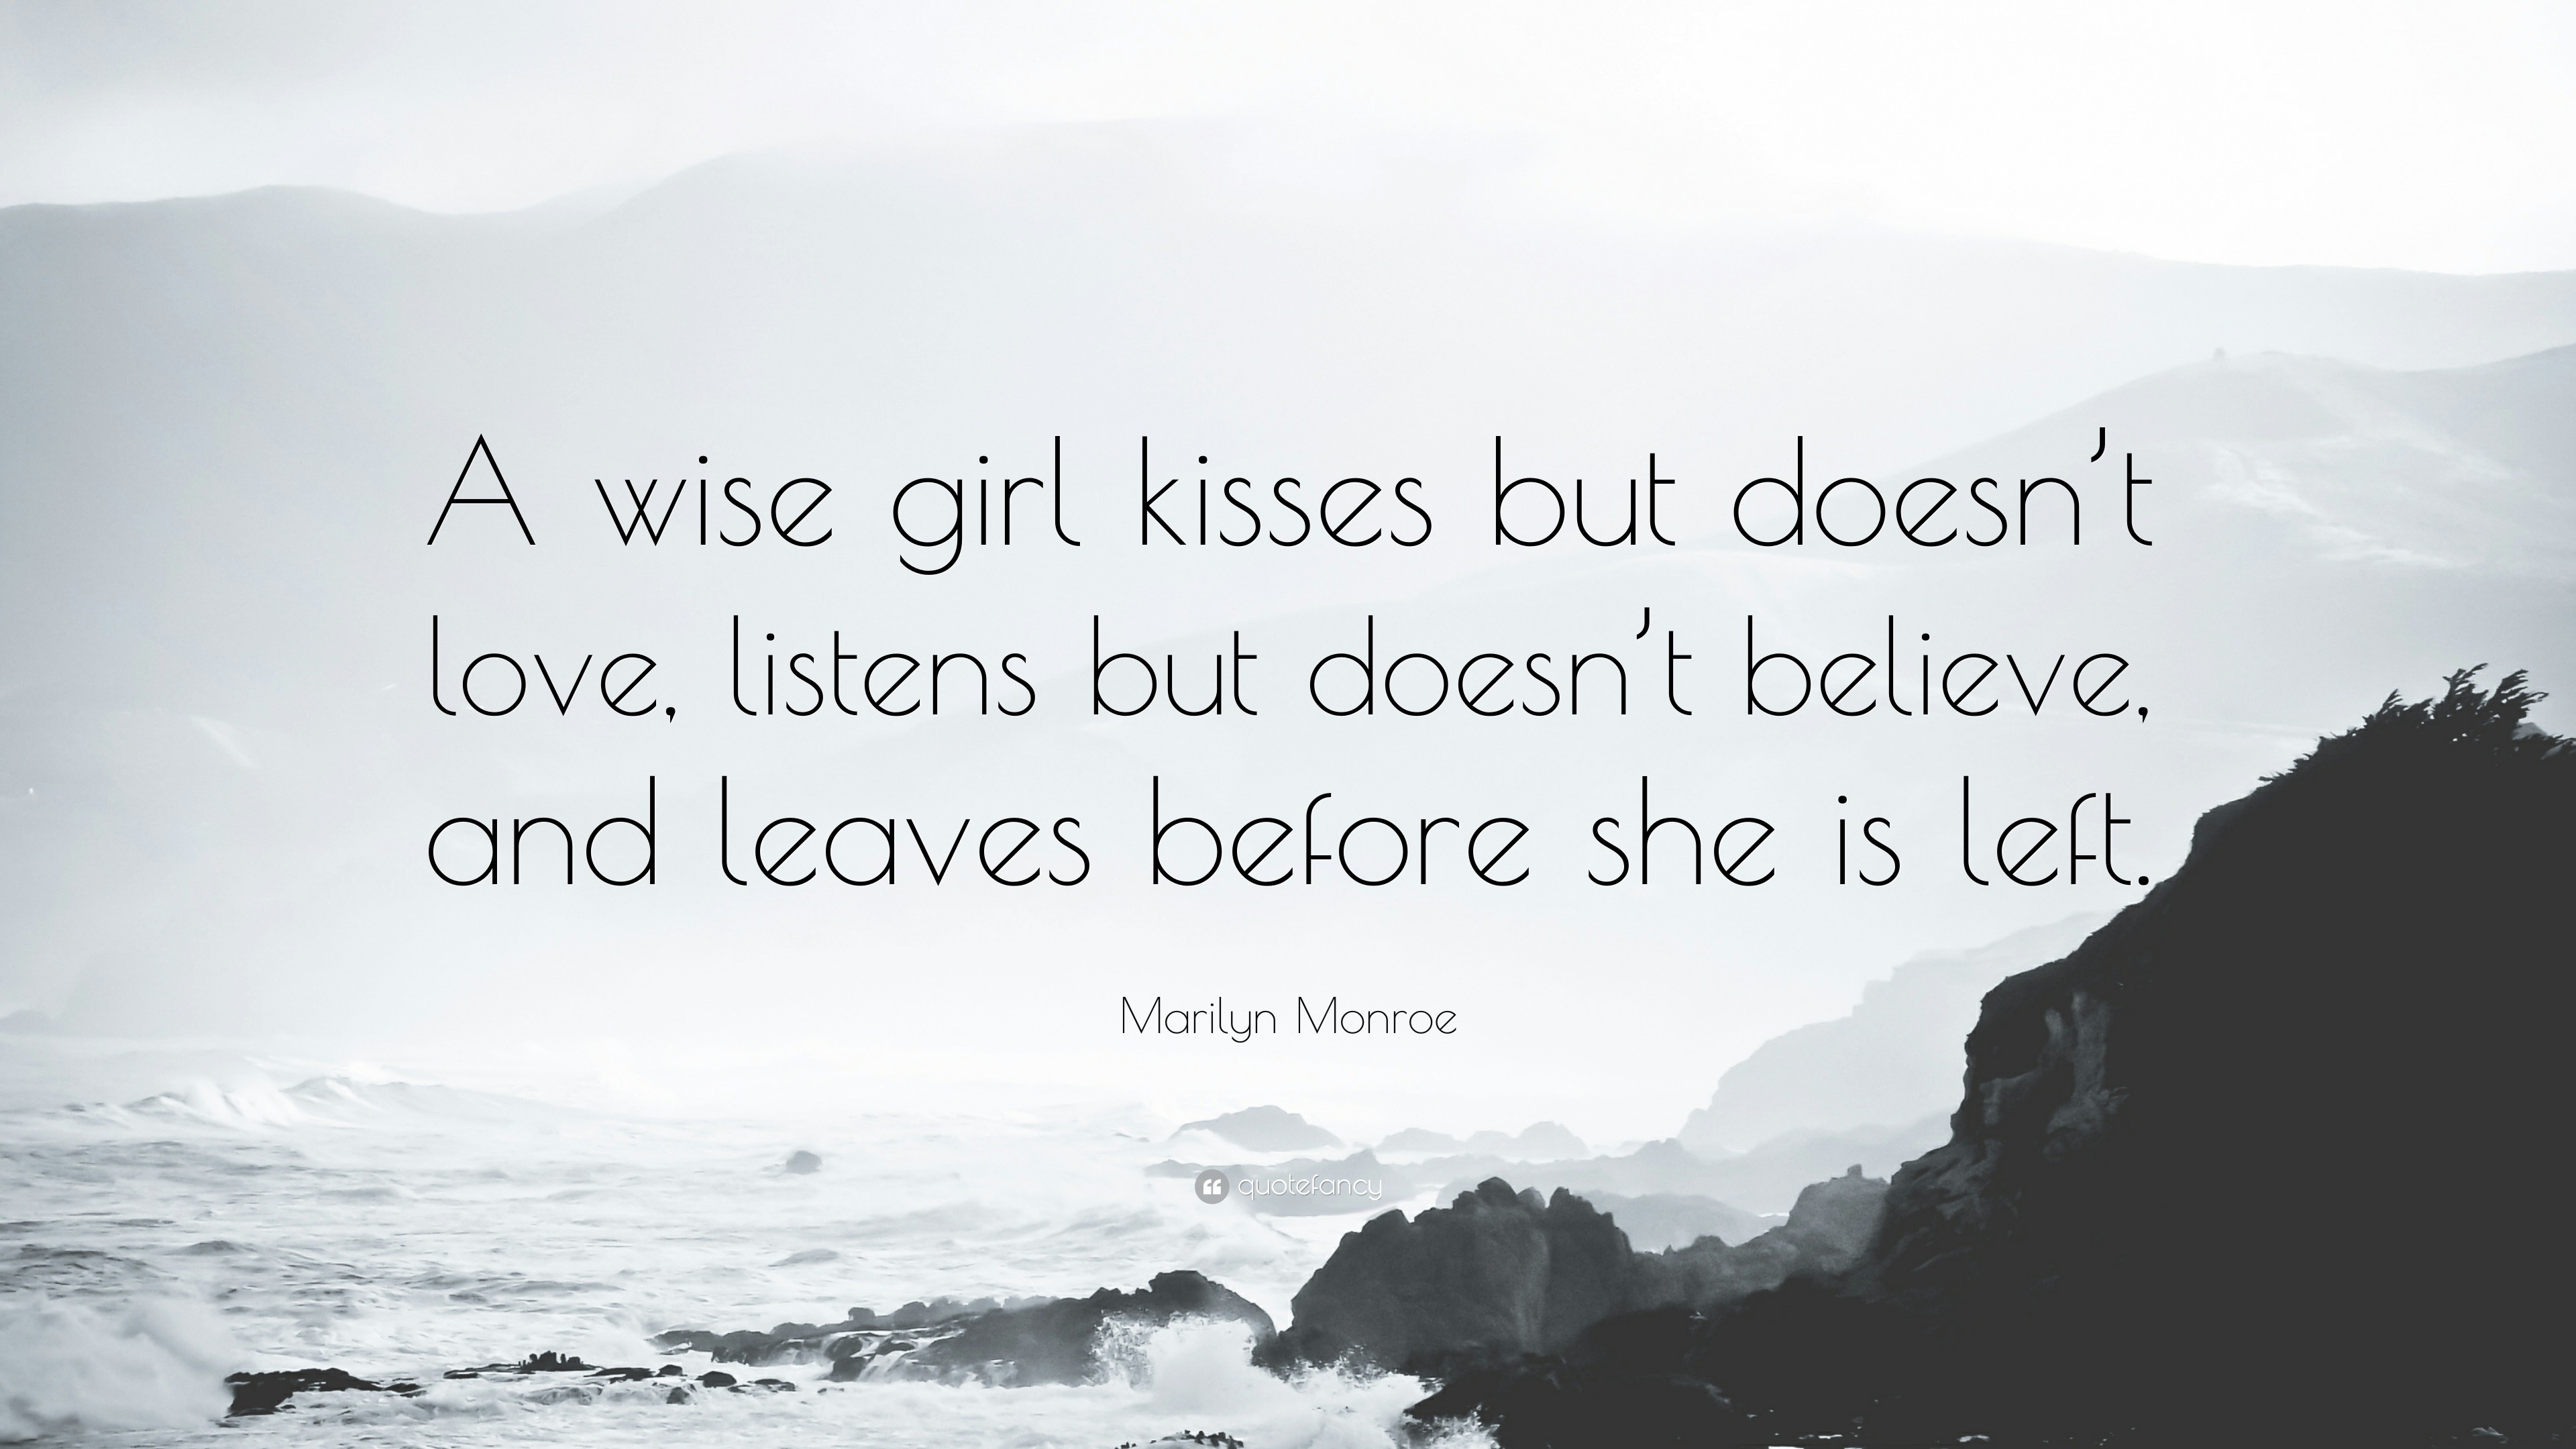 Marilyn Monroe Quote “A wise girl kisses but doesn t love listens